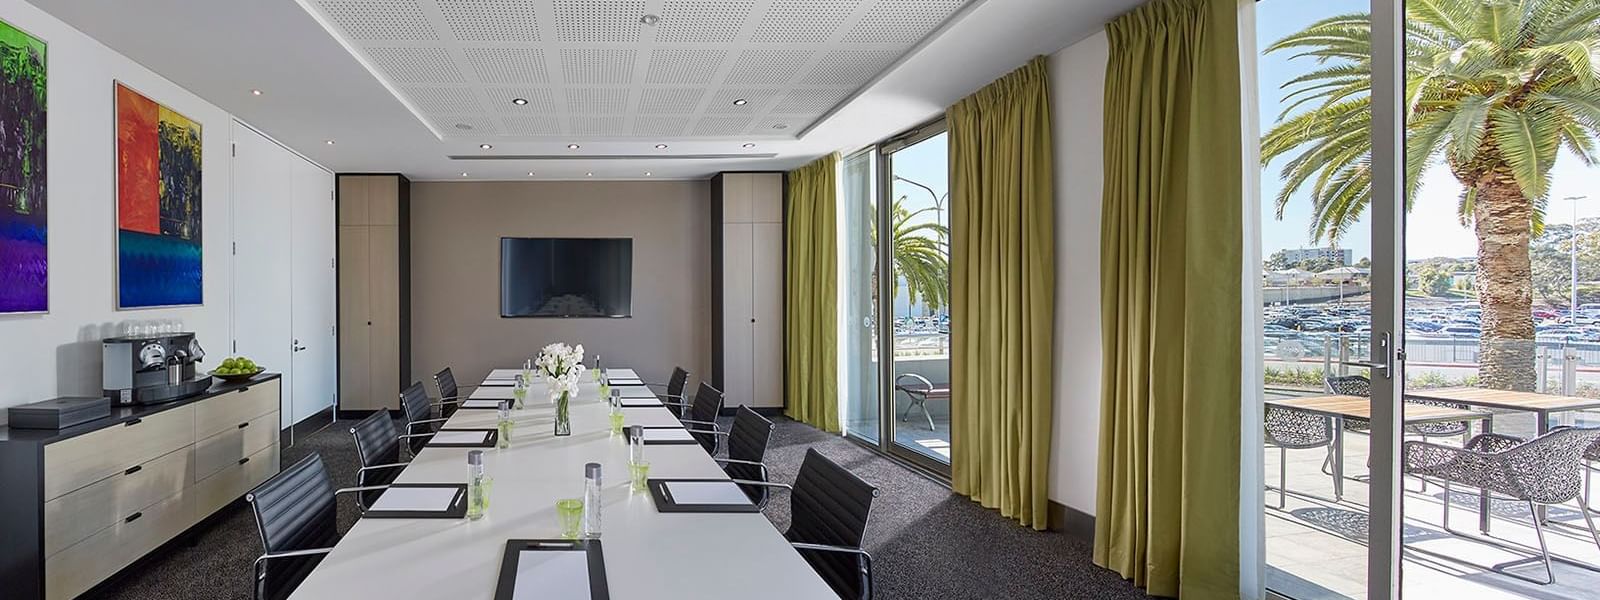 Classroom set-up in Business Centre at Crown Hotel Perth